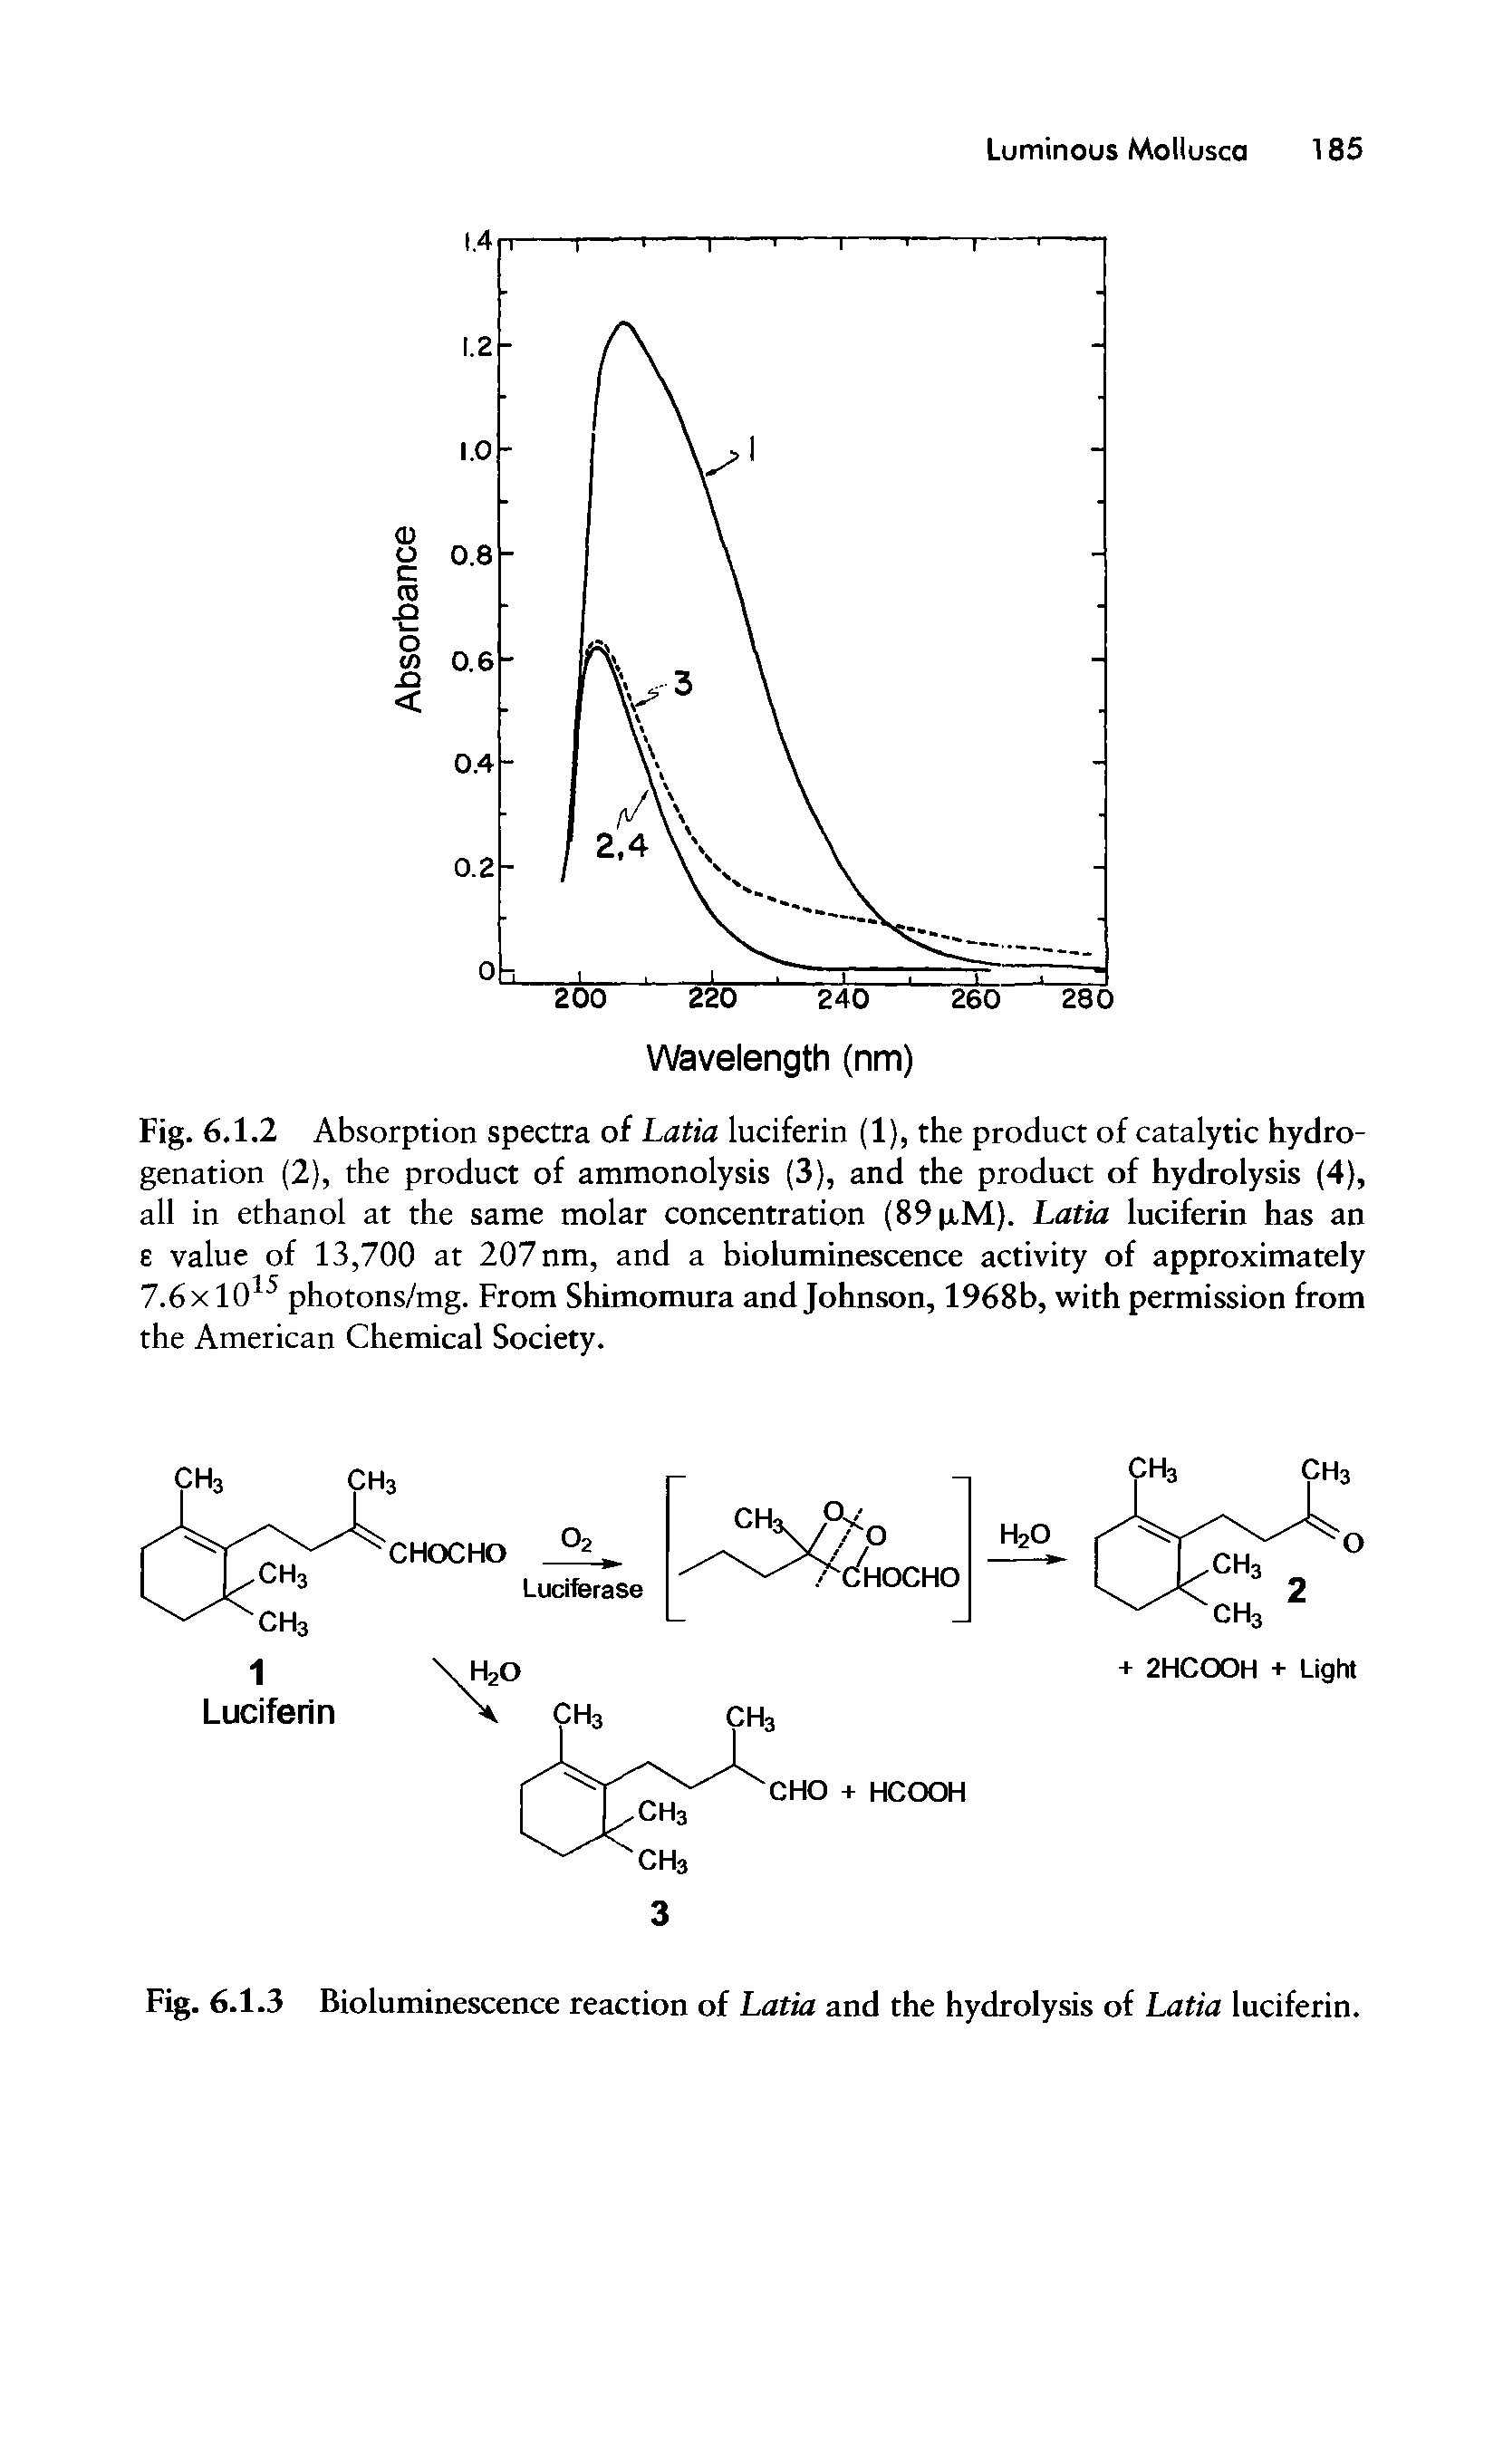 Fig. 6.1.2 Absorption spectra of Latia luciferin (1), the product of catalytic hydrogenation (2), the product of ammonolysis (3), and the product of hydrolysis (4), all in ethanol at the same molar concentration (89 pM). Latia luciferin has an e value of 13,700 at 207nm, and a bioluminescence activity of approximately 7.6x 1015 photons/mg. From Shimomura and Johnson, 1968b, with permission from the American Chemical Society.